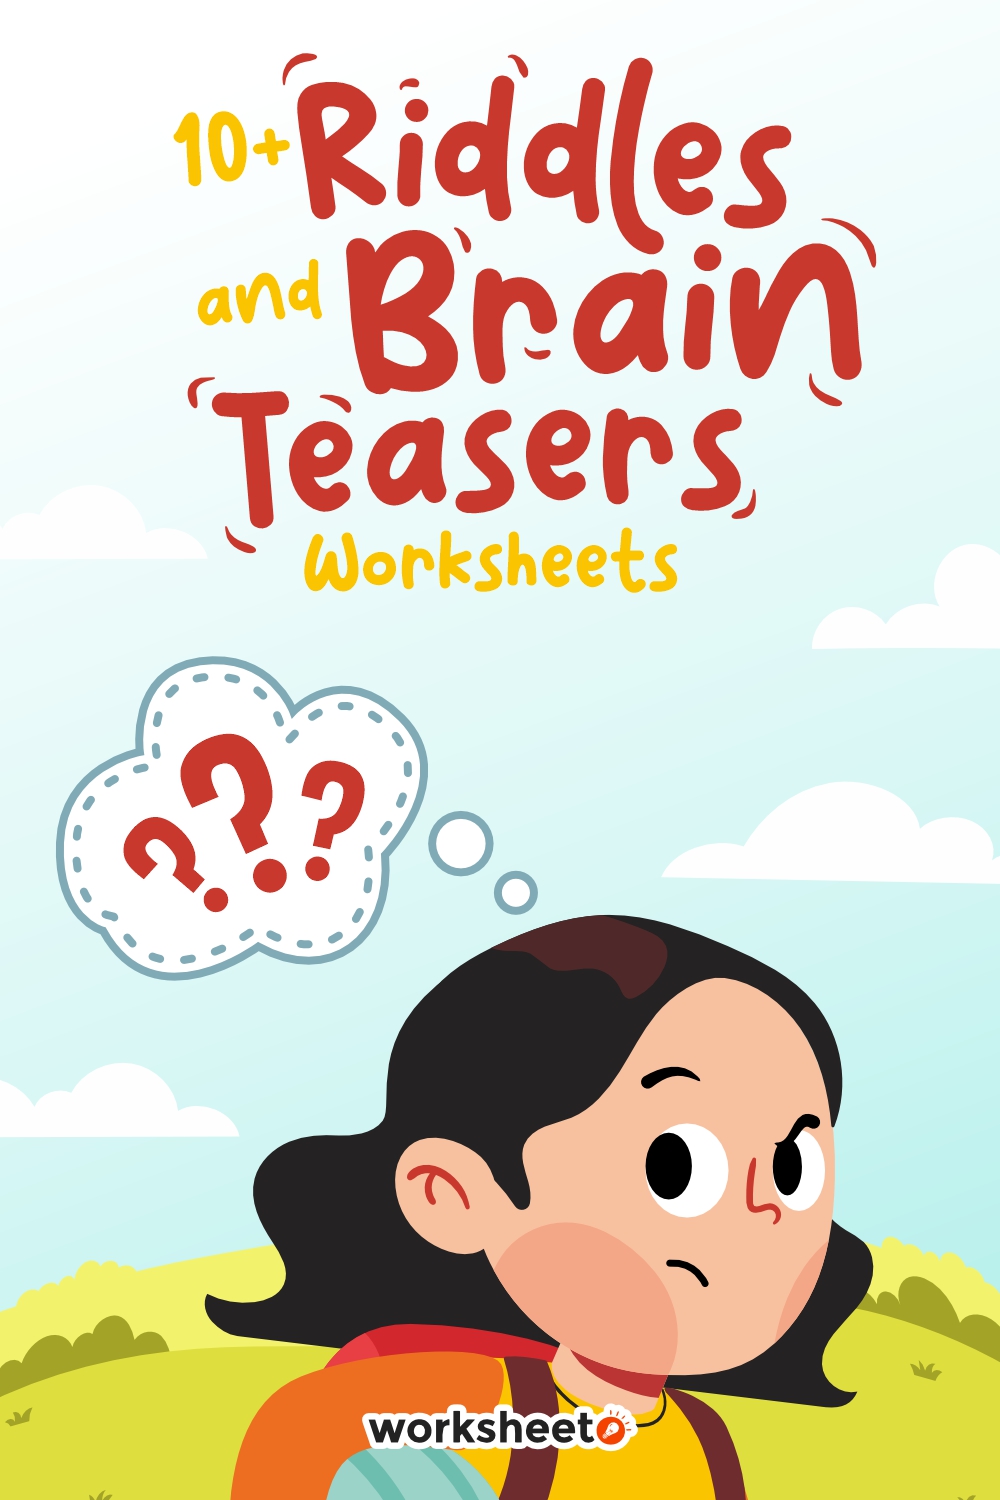 Riddles and Brain Teasers Worksheets